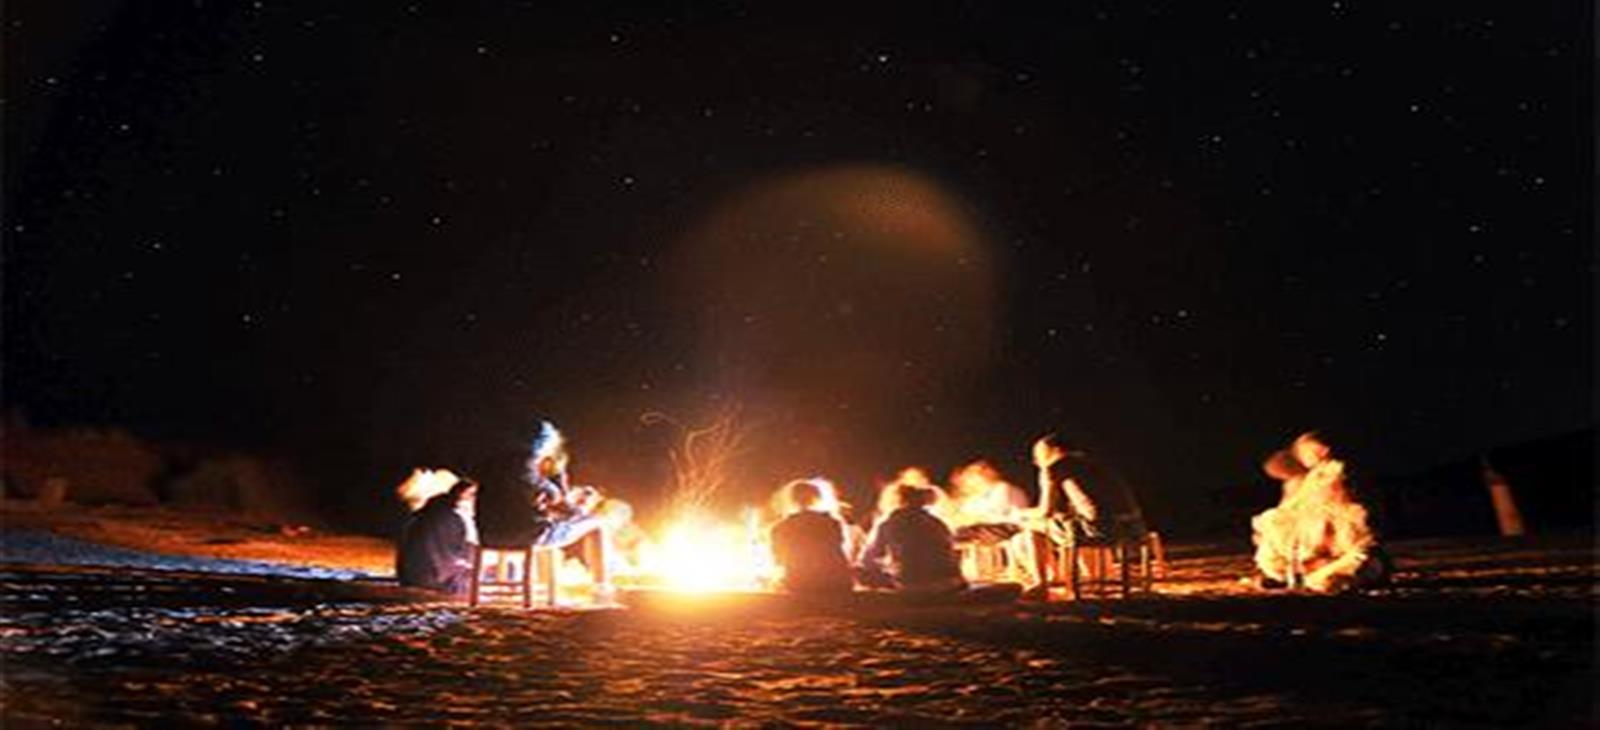 star gazing and camel riding trip from sharm port